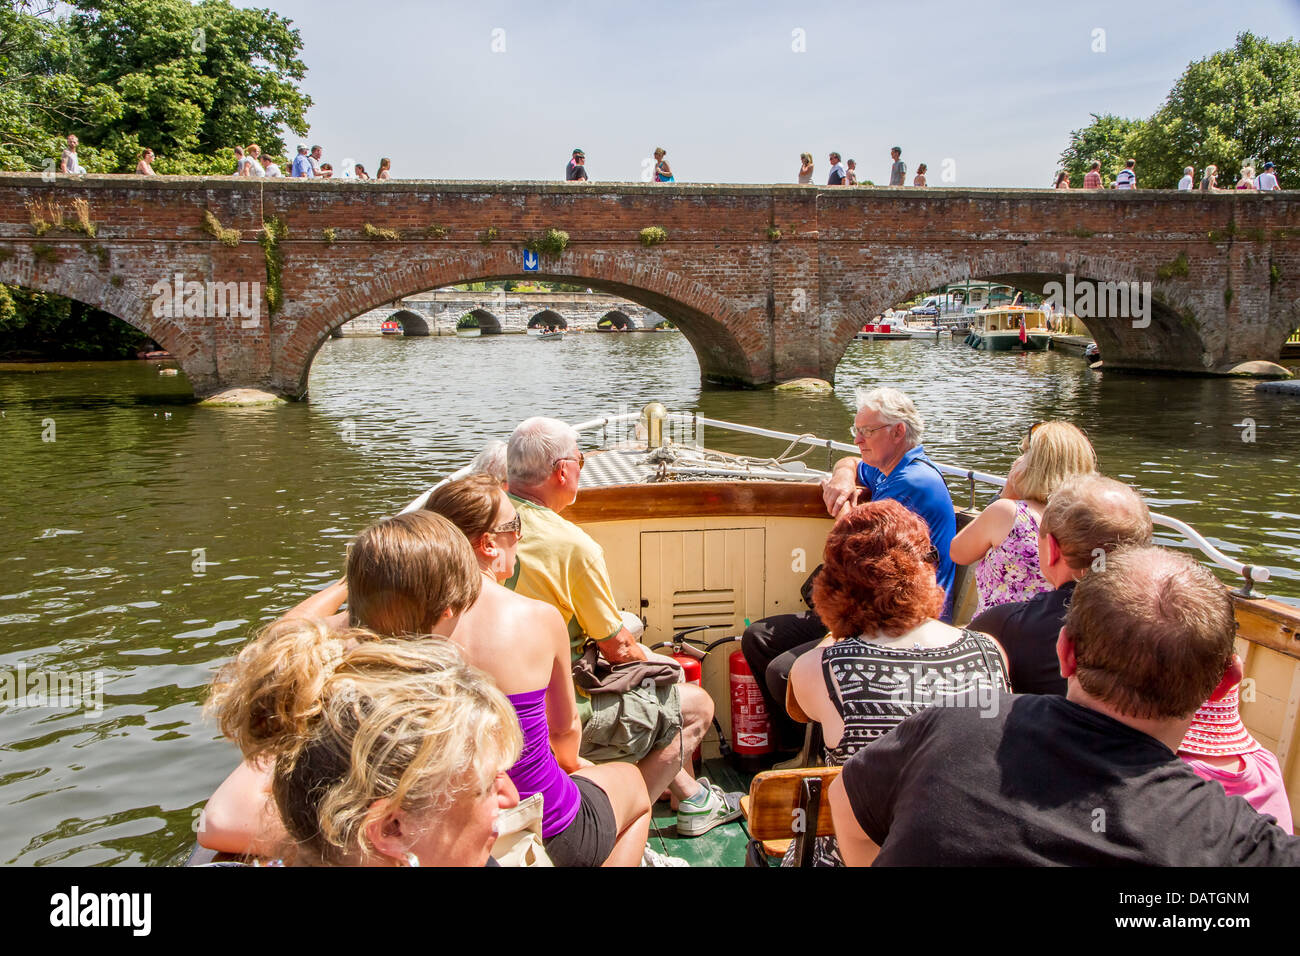 Tourists enjoying a pleasure boat trip on the River Avon in Stratford Stock Photo